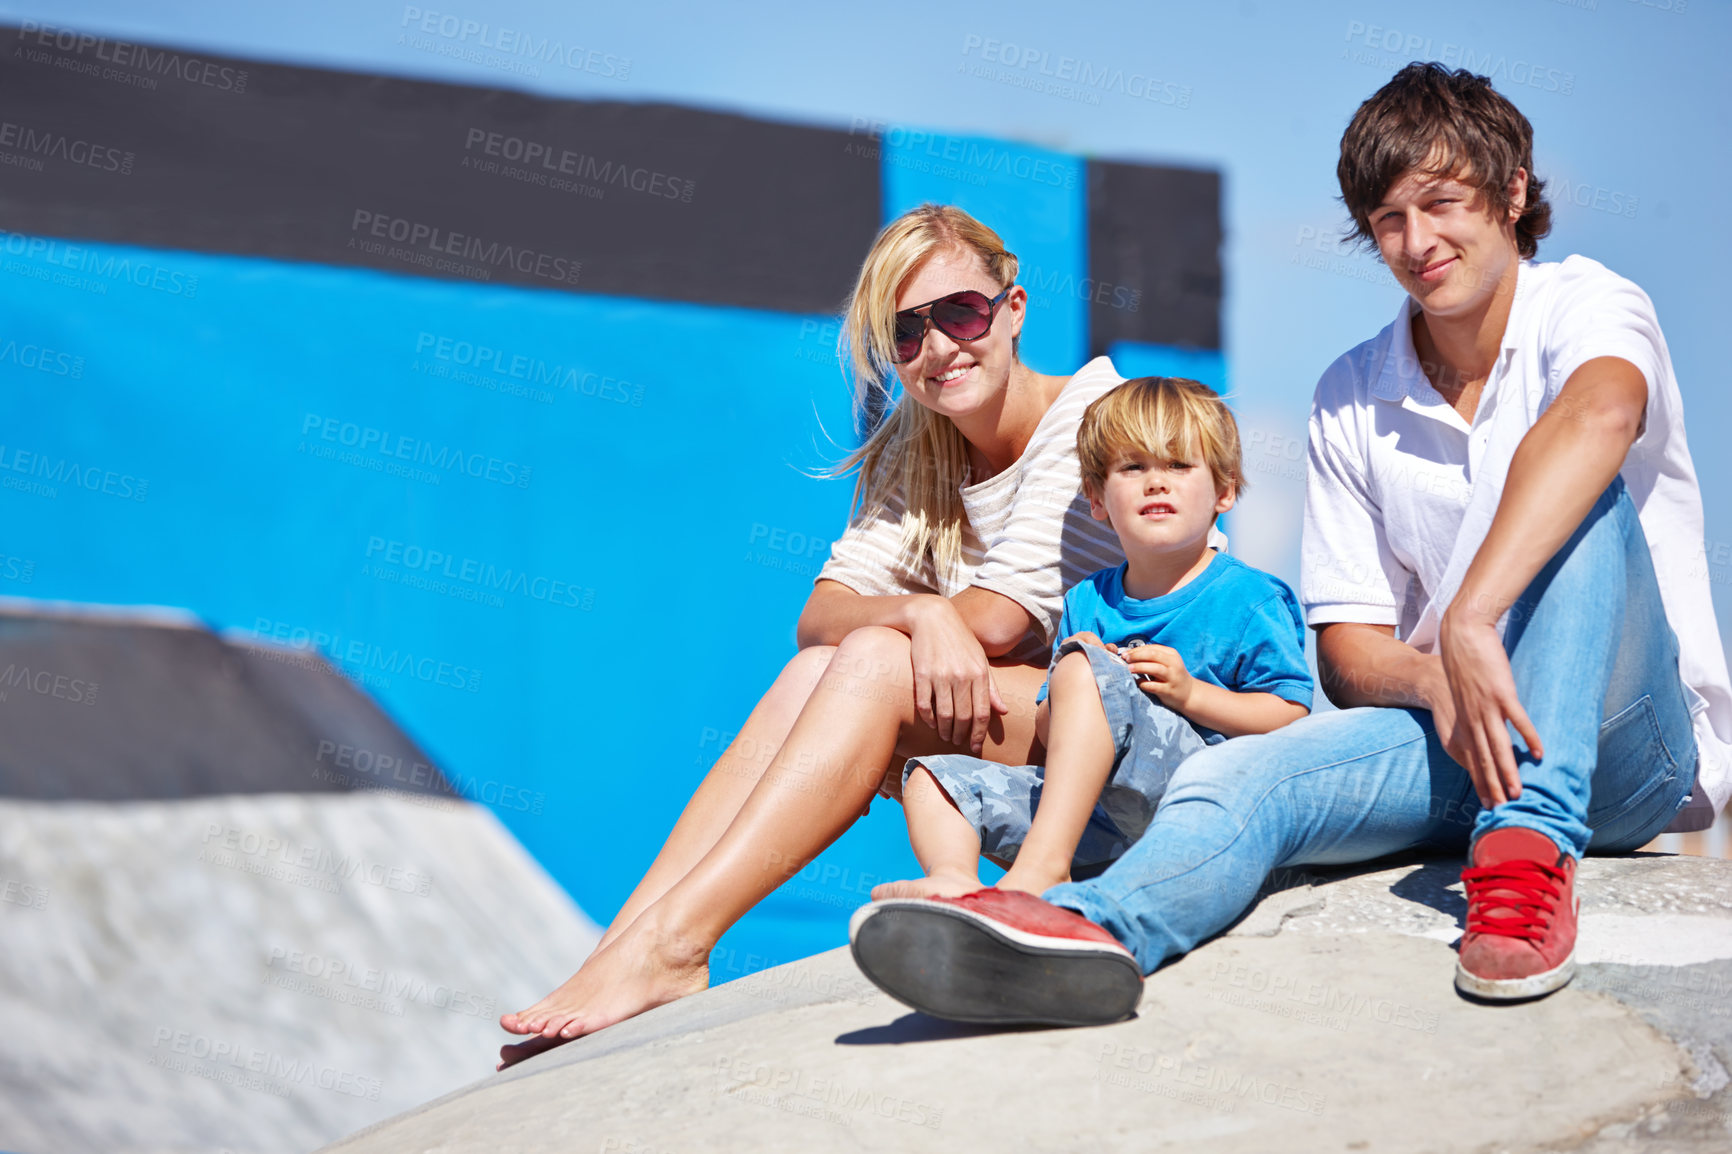 Buy stock photo Portrait of a two young teens and a little boy sitting outside at a skate park